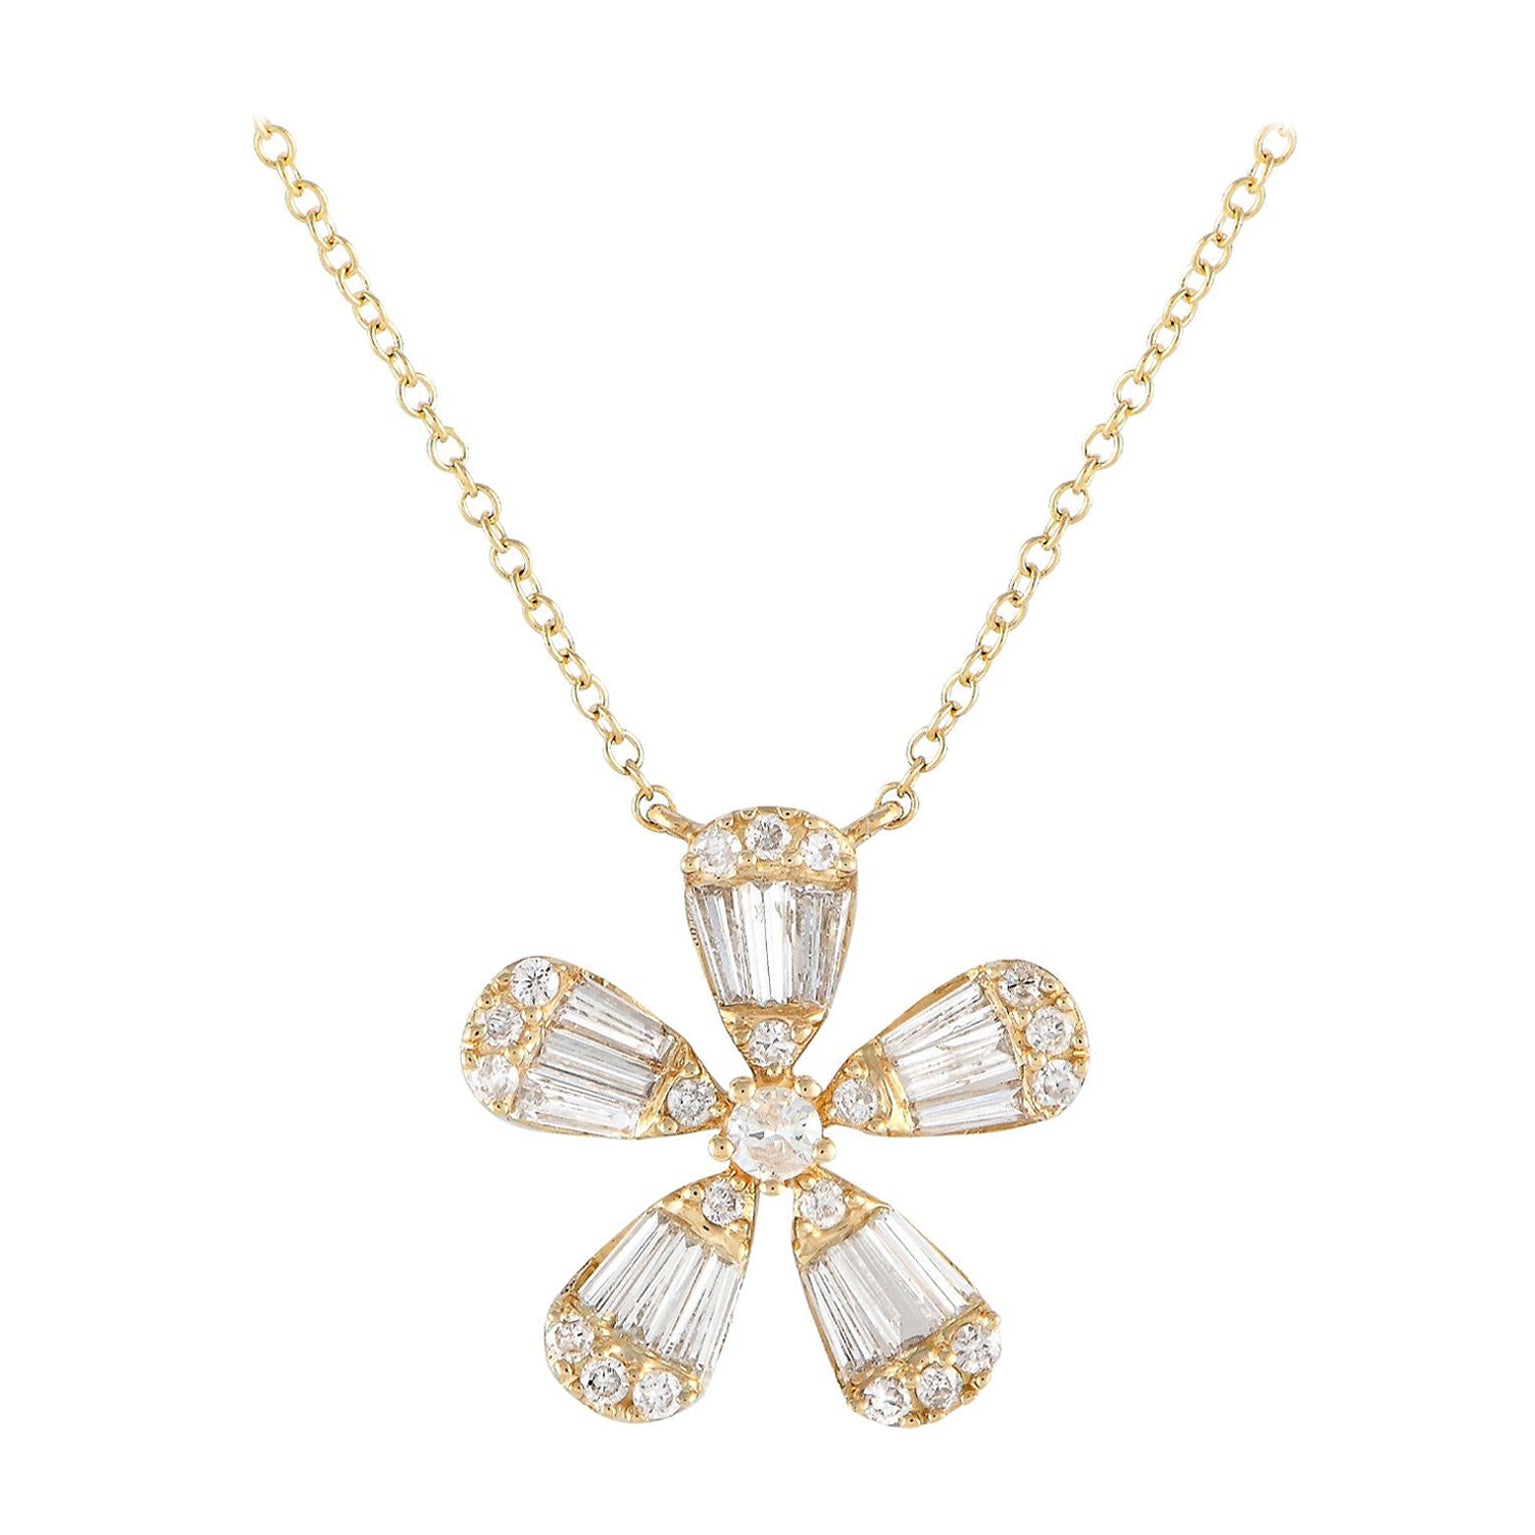 LB Exclusive 14K Yellow Gold 0.65ct Diamond Flower Necklace NK01351